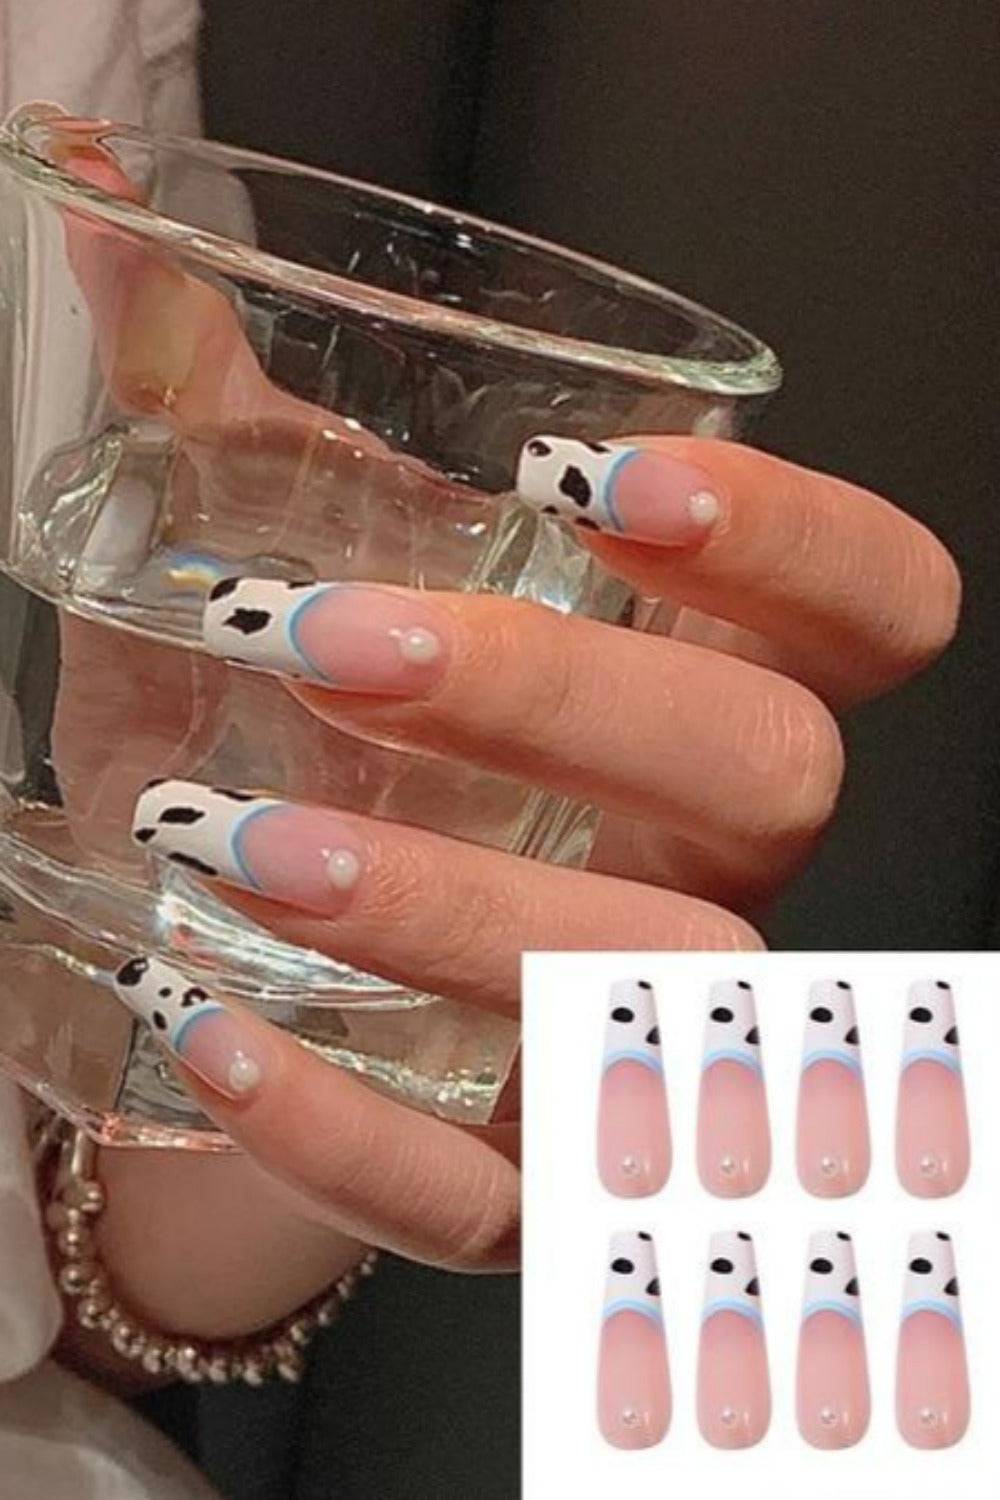 Press On Nails Neon Matte Glossy French Tip Coffin Nail Kit - TGC Boutique - Press On Nails